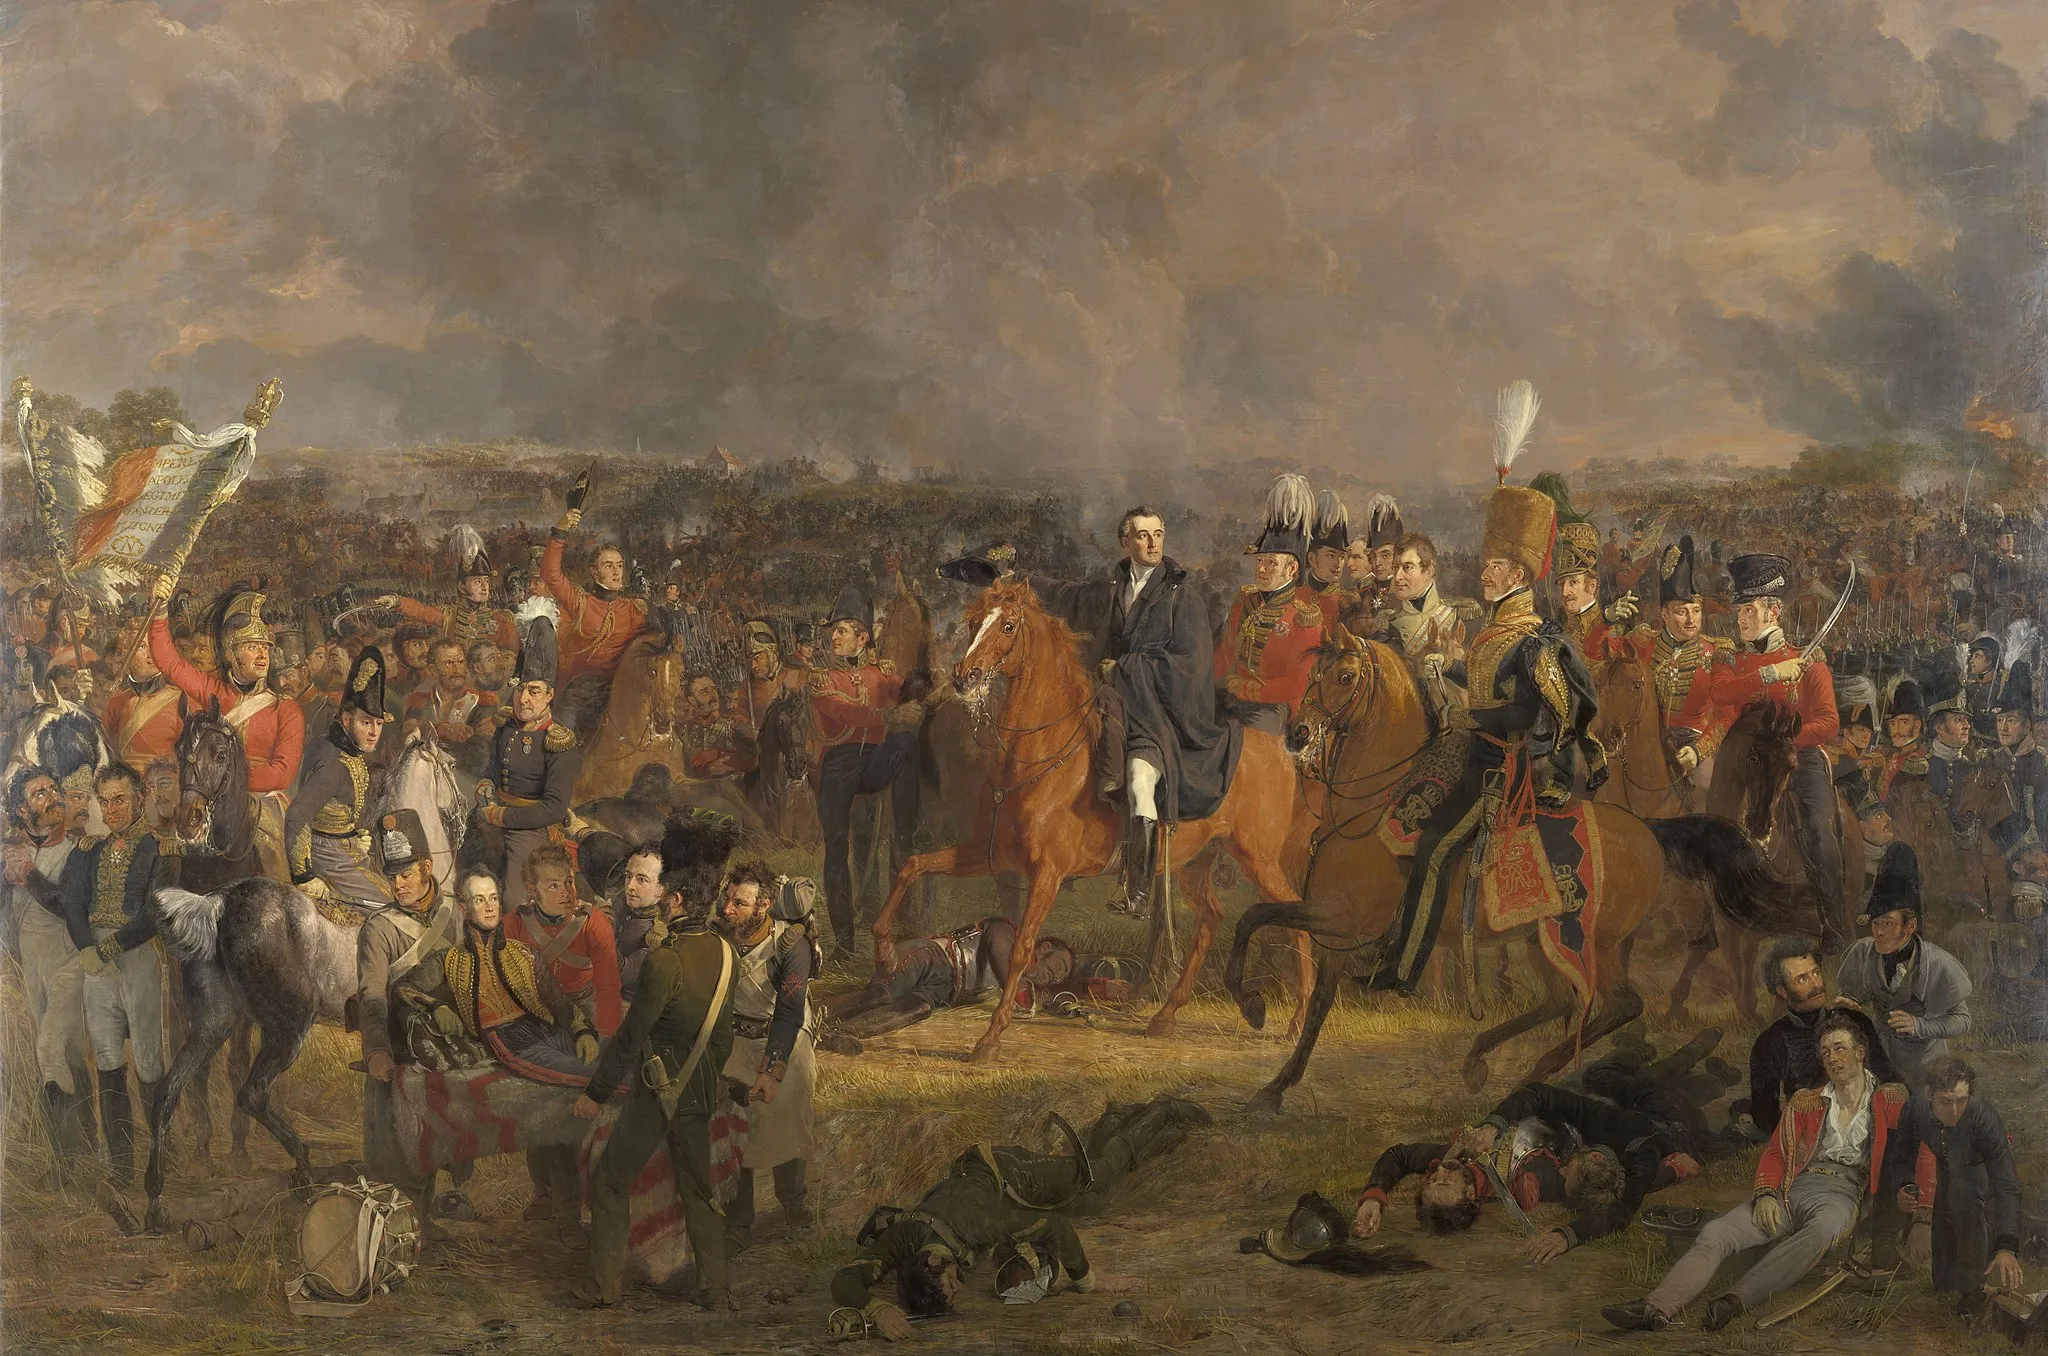 Photo showing: The Battle of Waterloo, 18 June 1815. View of the battle field on the moment that the British commander Wellington receives the message that help from Prussian troops is underway. Bottom left the wounded Prince of Orange is being carried away. The commanders and other officers are depicted in the center on horseback. Bottom right a number of wounded and dead soldiers. In the background the battle is raging. The people portrayed include Lord Uxbridge, Sir Rowland Hill, Staff Colonel Sir William Delancey, Major-General George Cooke, Colonel Harvey, Colonel Campbell, lieutenant-general Don Miguel Ricardo de Álava, lieutenant-colonel F.C. Ponsonby, Major William Thornhill, Jean Victor, baron De Constant de Rebeque, Colonel Sir John Elley, lieutenant-colonel Aberson, General-major A.K.J.G. d'Aubremé, Captain Aberson, Captain H. Roepel, Colonel H. Detmers, Major J.L.D. van der Smissen, Lieutenant-colonel A. van Thielen, Lieutenant-colonel Jhr. W.F. Boreel, Lieutenant-general D.H. Baron Chassé, Colonel Sir G.A. Wood, General Major J.B. Baon van Merlen, Lieutenant-general Ch. von Alten, Major General Sir Colin Halkett, Lieutenant-Colonel William George Harris, Captain C. Nepveu, Fitzroy James Henry Somerset, H.D. Graaf De Cruquenbourg, N.C. Ampt, General-Major Jhr. A.D. Trip, John William Fremantle, General-Major Graaf van Rheede, Major-General Lord Edward Somerset, Charles Gordon Lennox, Lord March, Colonel Dennis Pack, Major P.S.R. van Hooff, Major-general John Ormsby Vandeleur, Major Georg, Freiherr Baring, Colonel C. Von Ompteda, Colonel L.J.H.F. De Caylar and Général de Division Cambronne, Maréchal de Camp.